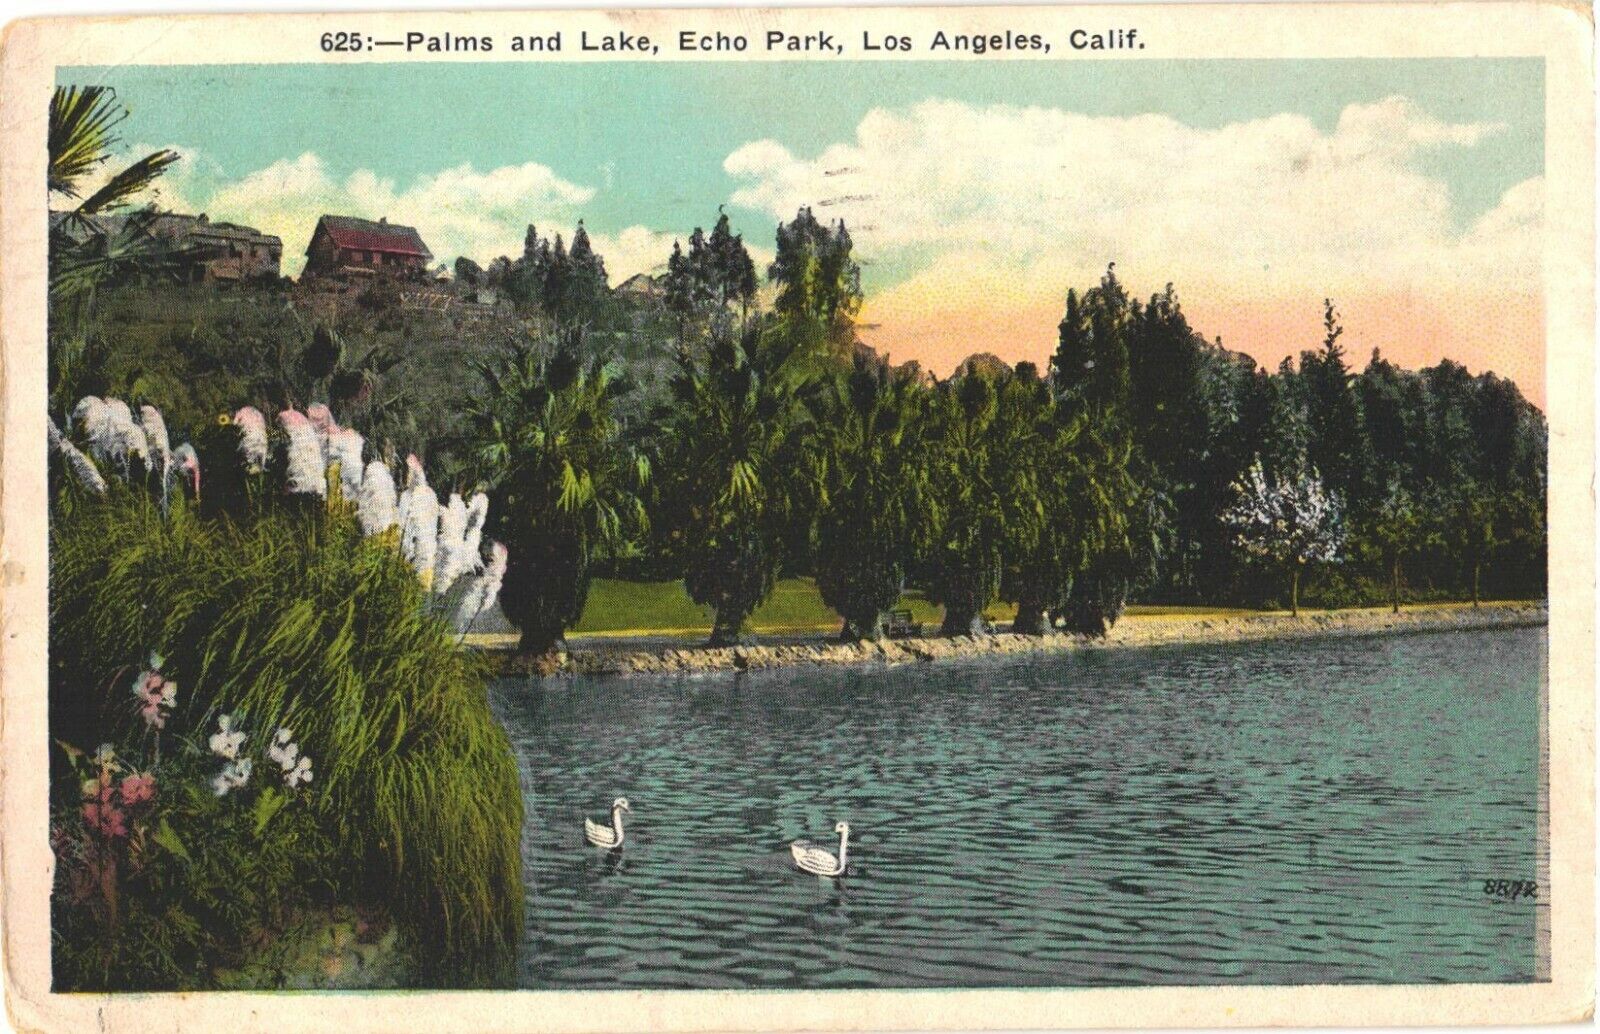 Scenic View of Palms And Lake, Echo Park, Los Angeles, California Postcard